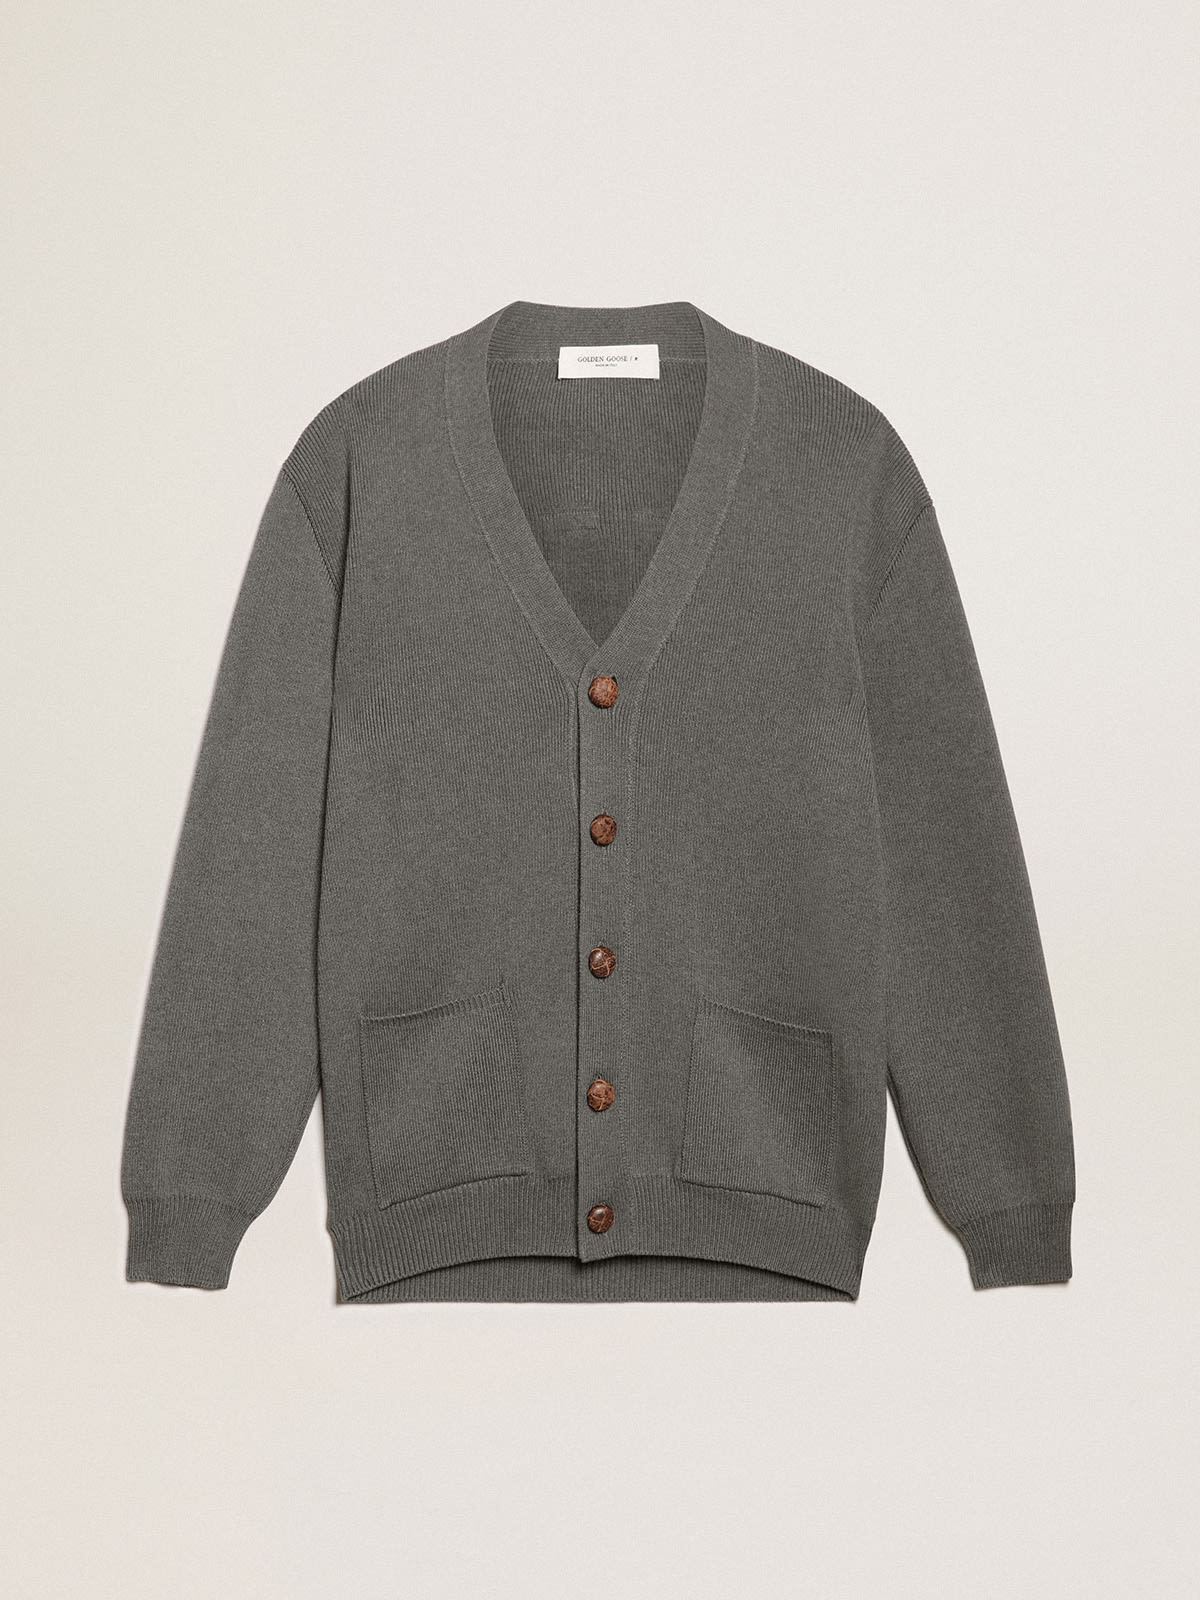 Golden Goose - Women’s cardigan in gray melange cotton with logo on the back in 